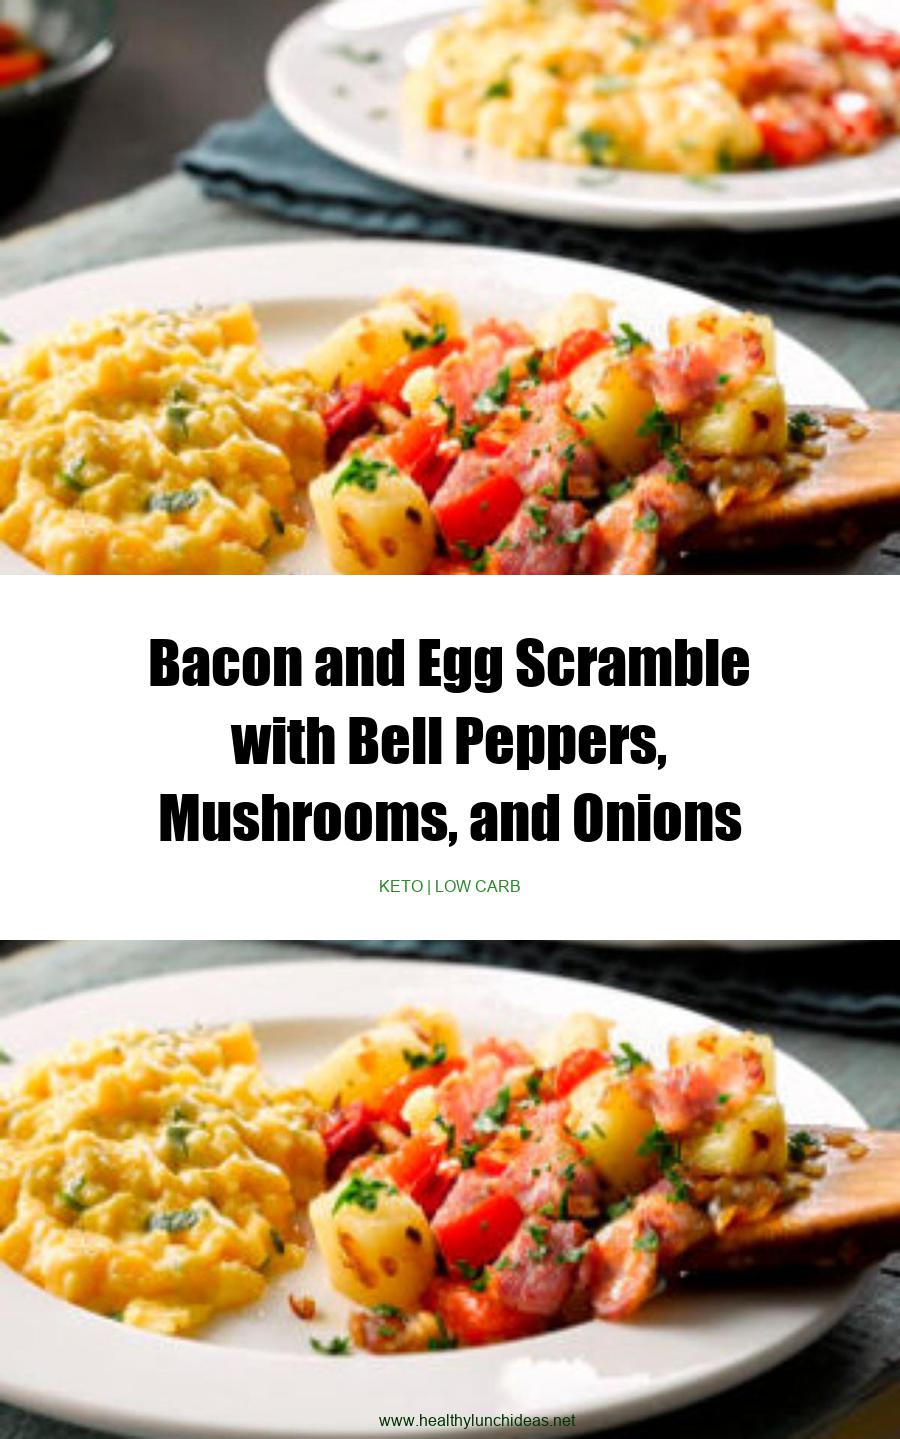 Healthy Recipes: Bacon and Egg Scramble with Bell Peppers, Mushrooms ...